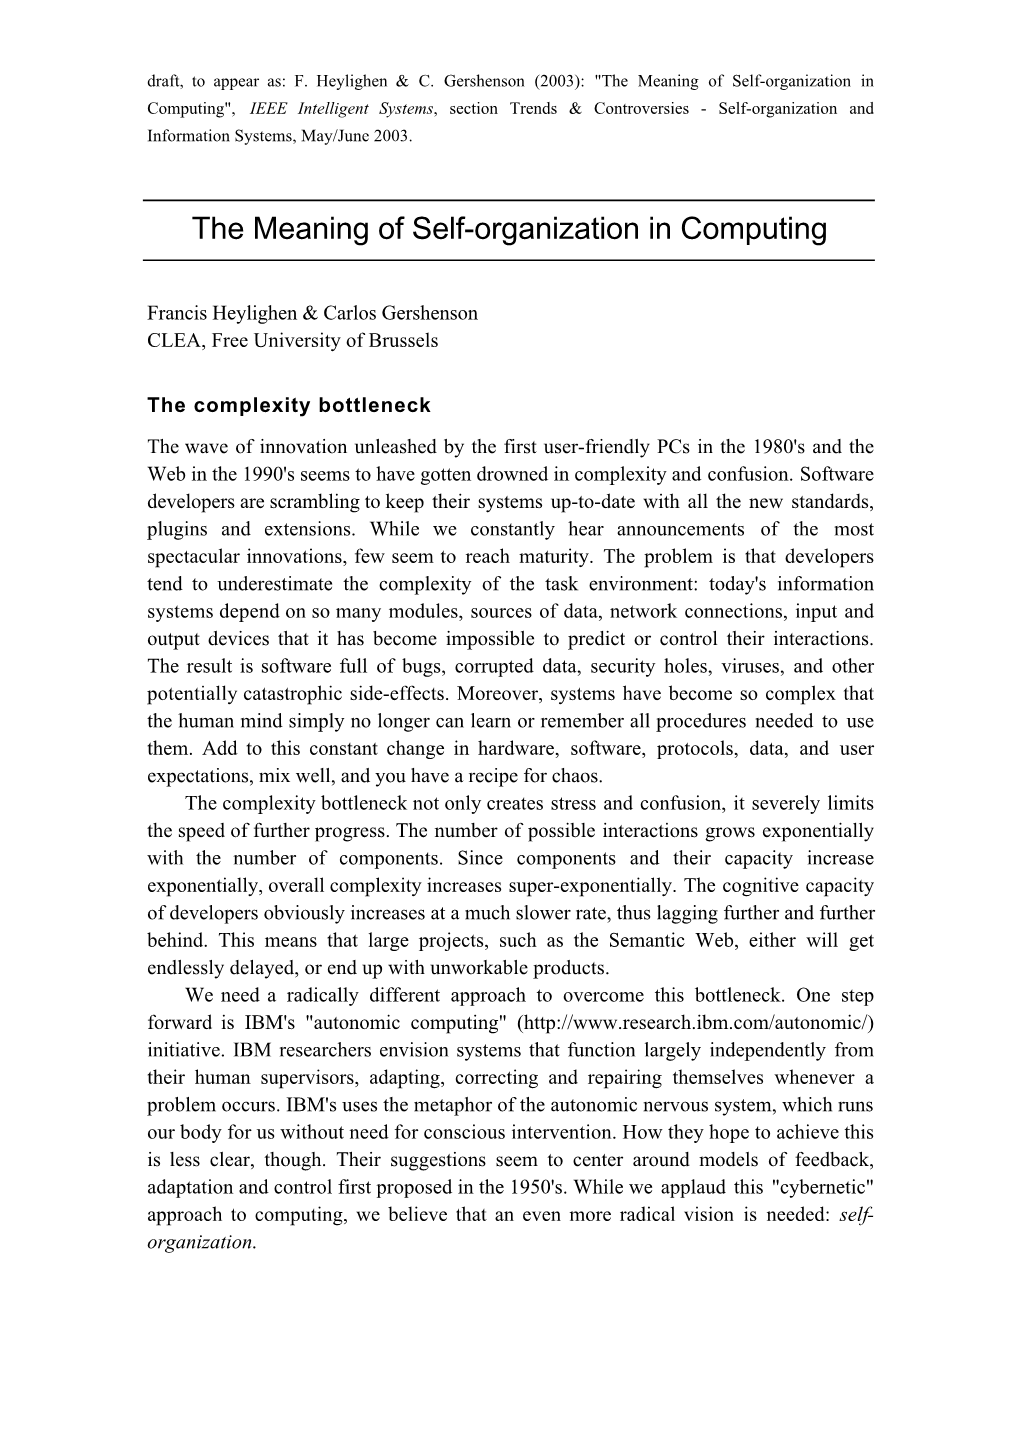 The Meaning of Self-Organization in Computing", IEEE Intelligent Systems, Section Trends & Controversies - Self-Organization and Information Systems, May/June 2003